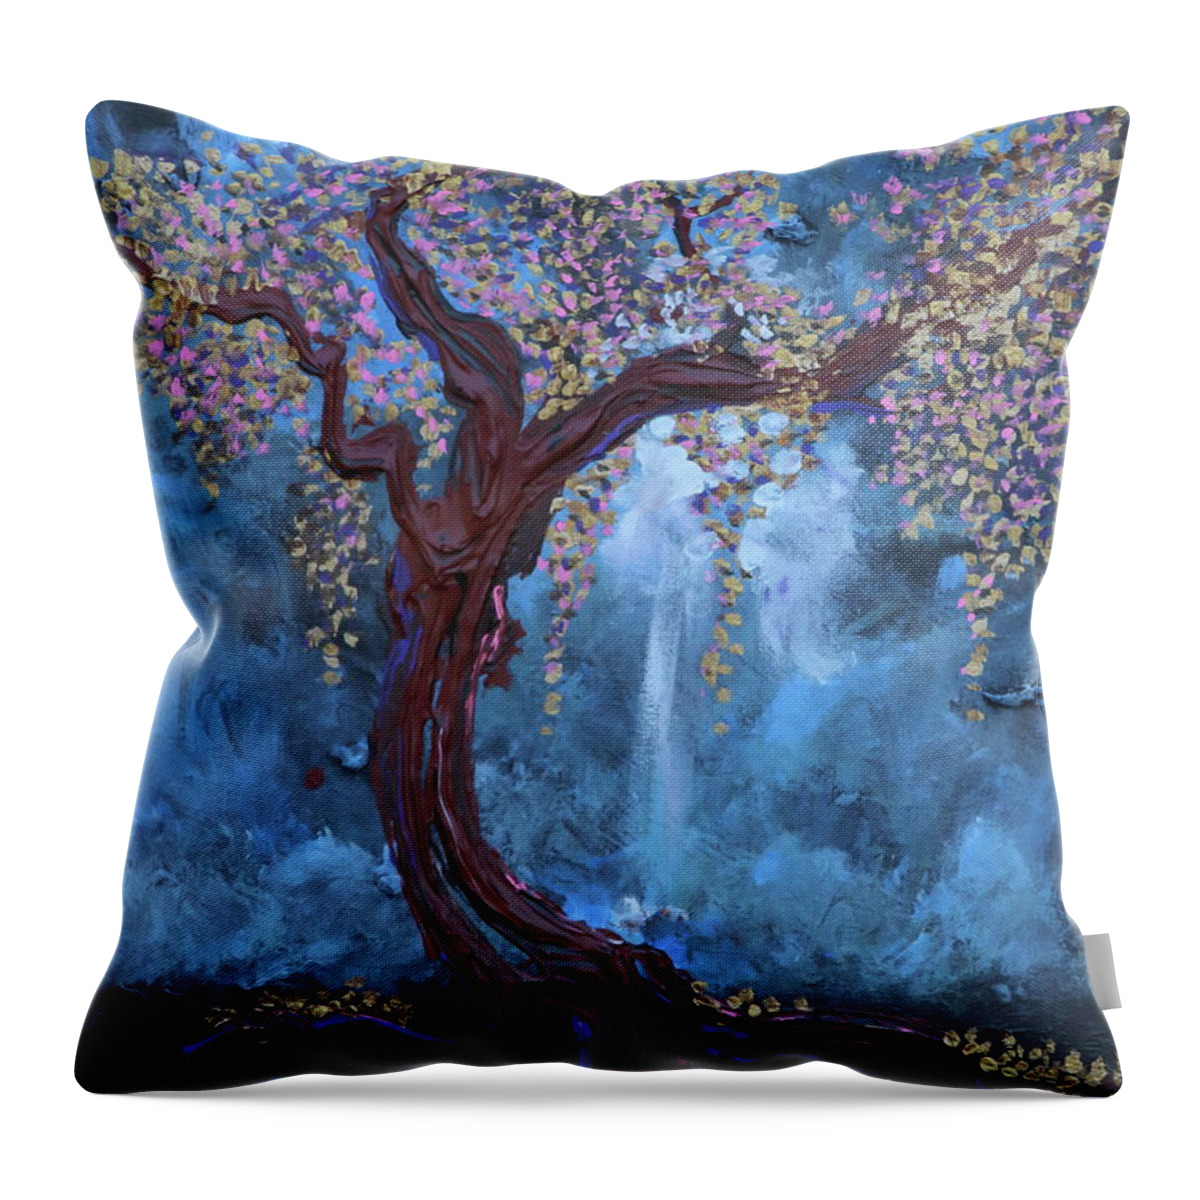 Impressionism Throw Pillow featuring the painting The LIght Sustains Me by Stefan Duncan